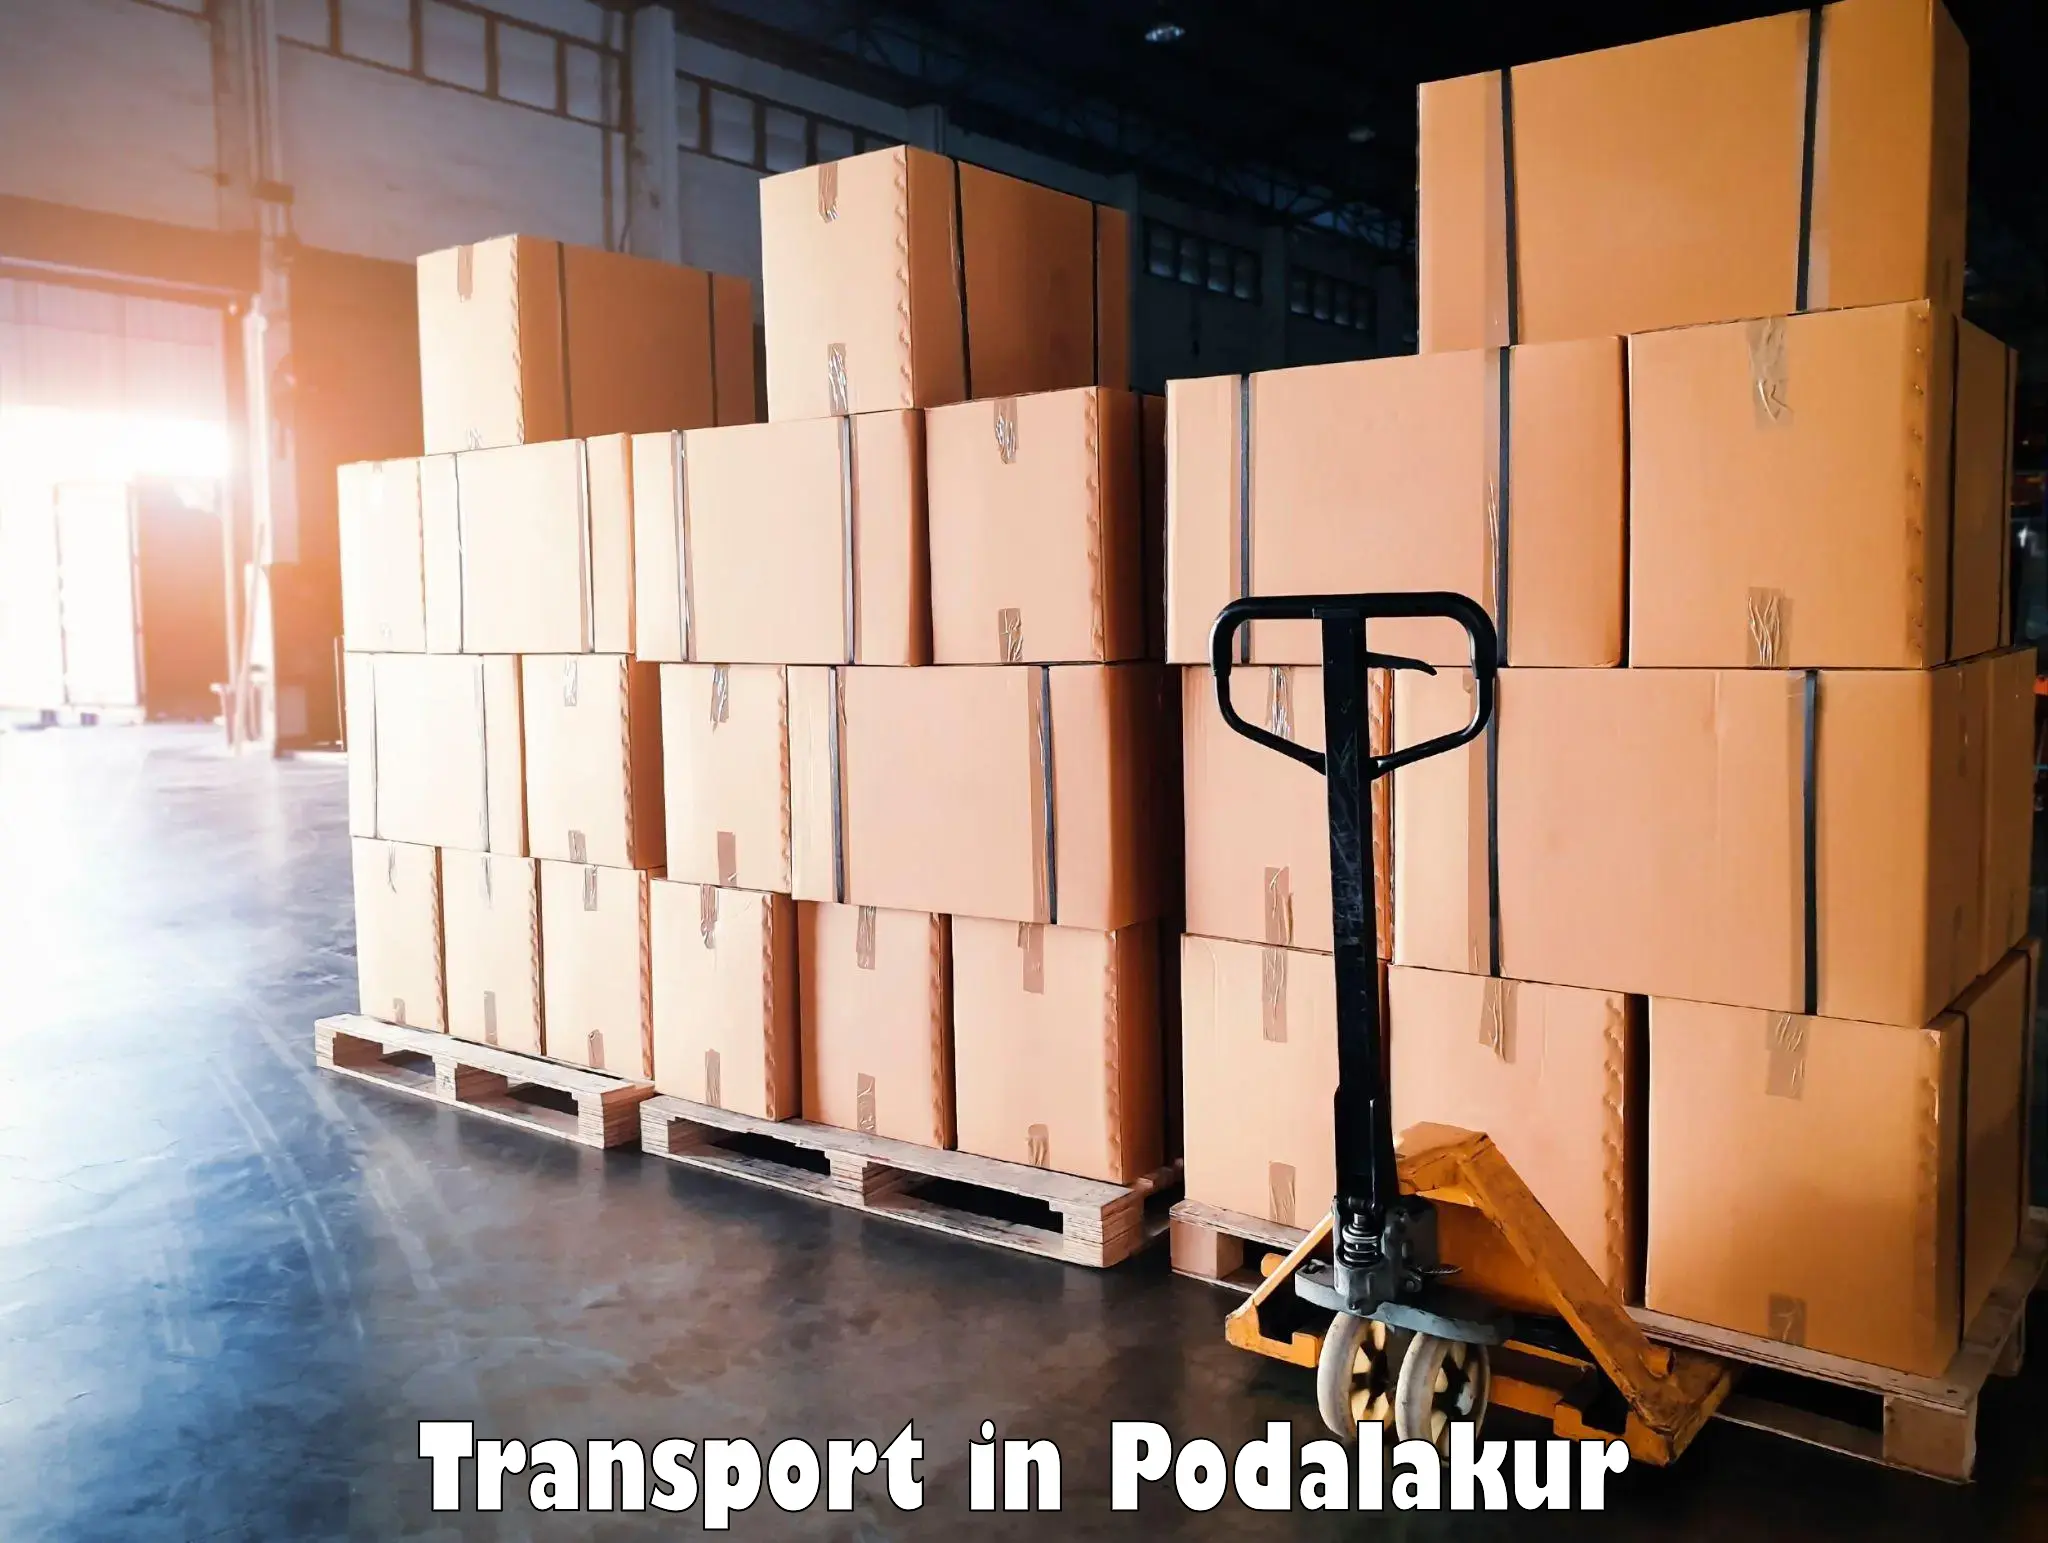 Domestic transport services in Podalakur